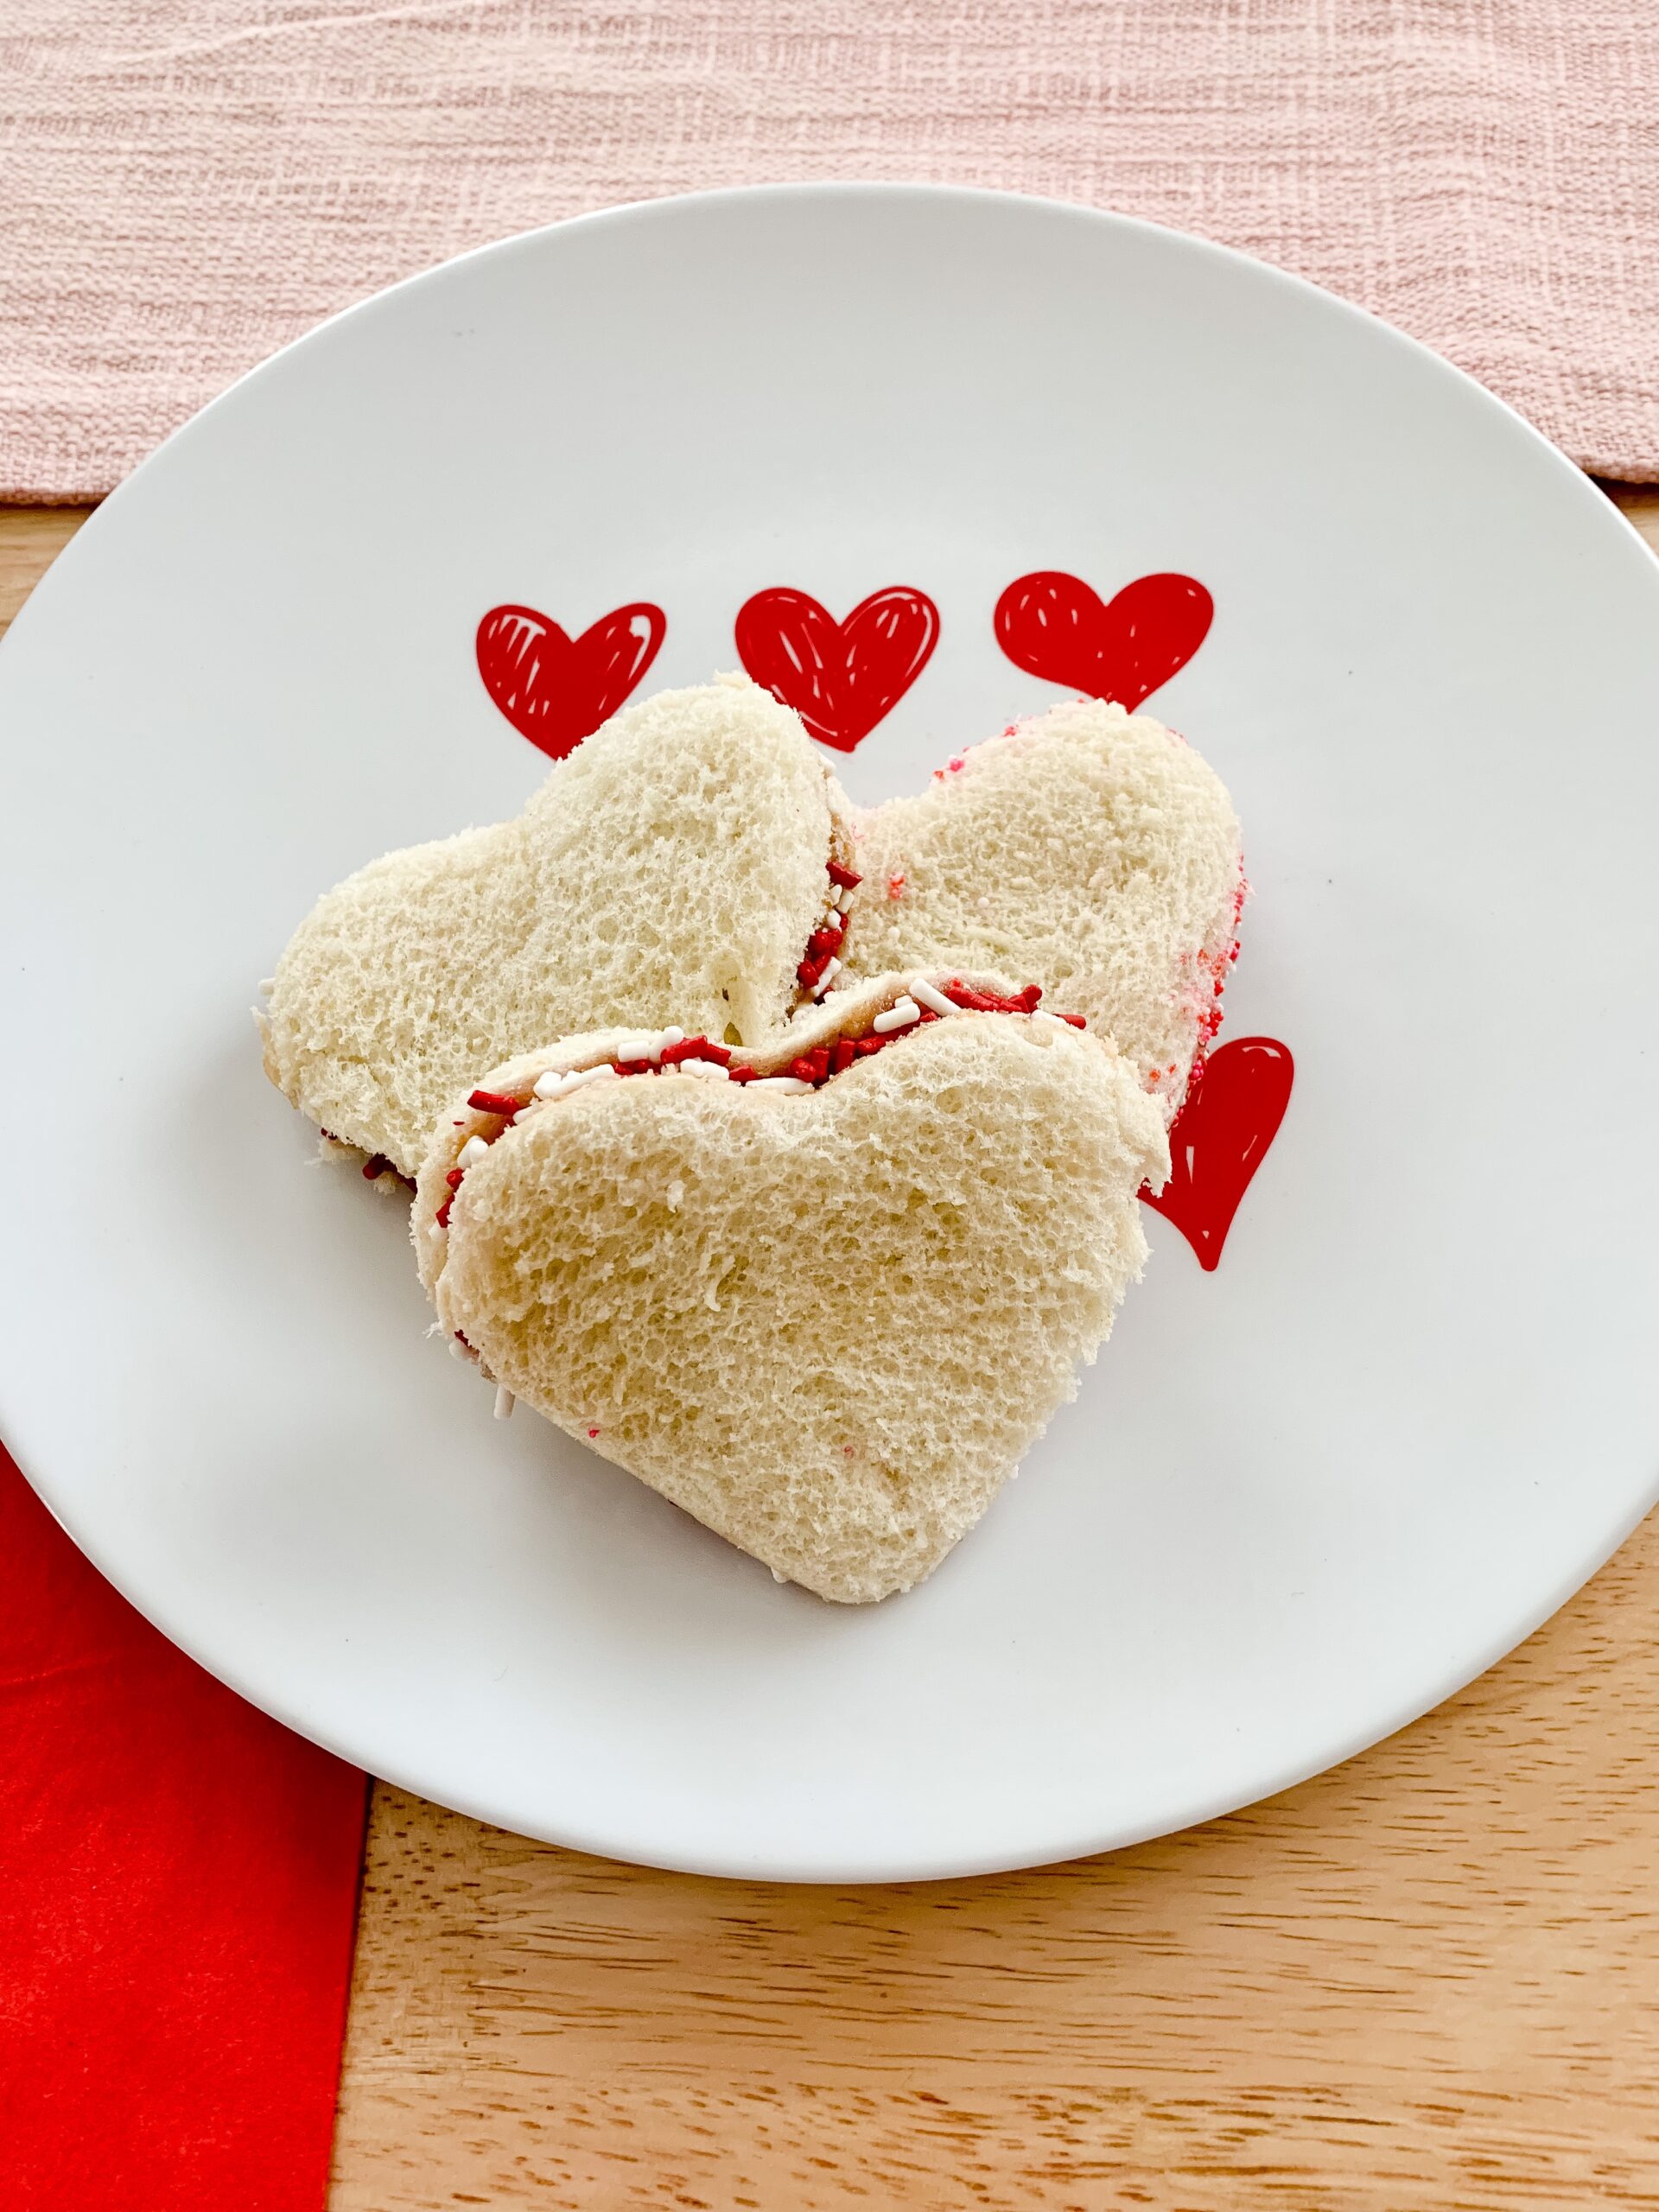 Valentine's Day peanut butter and jelly sandwiches